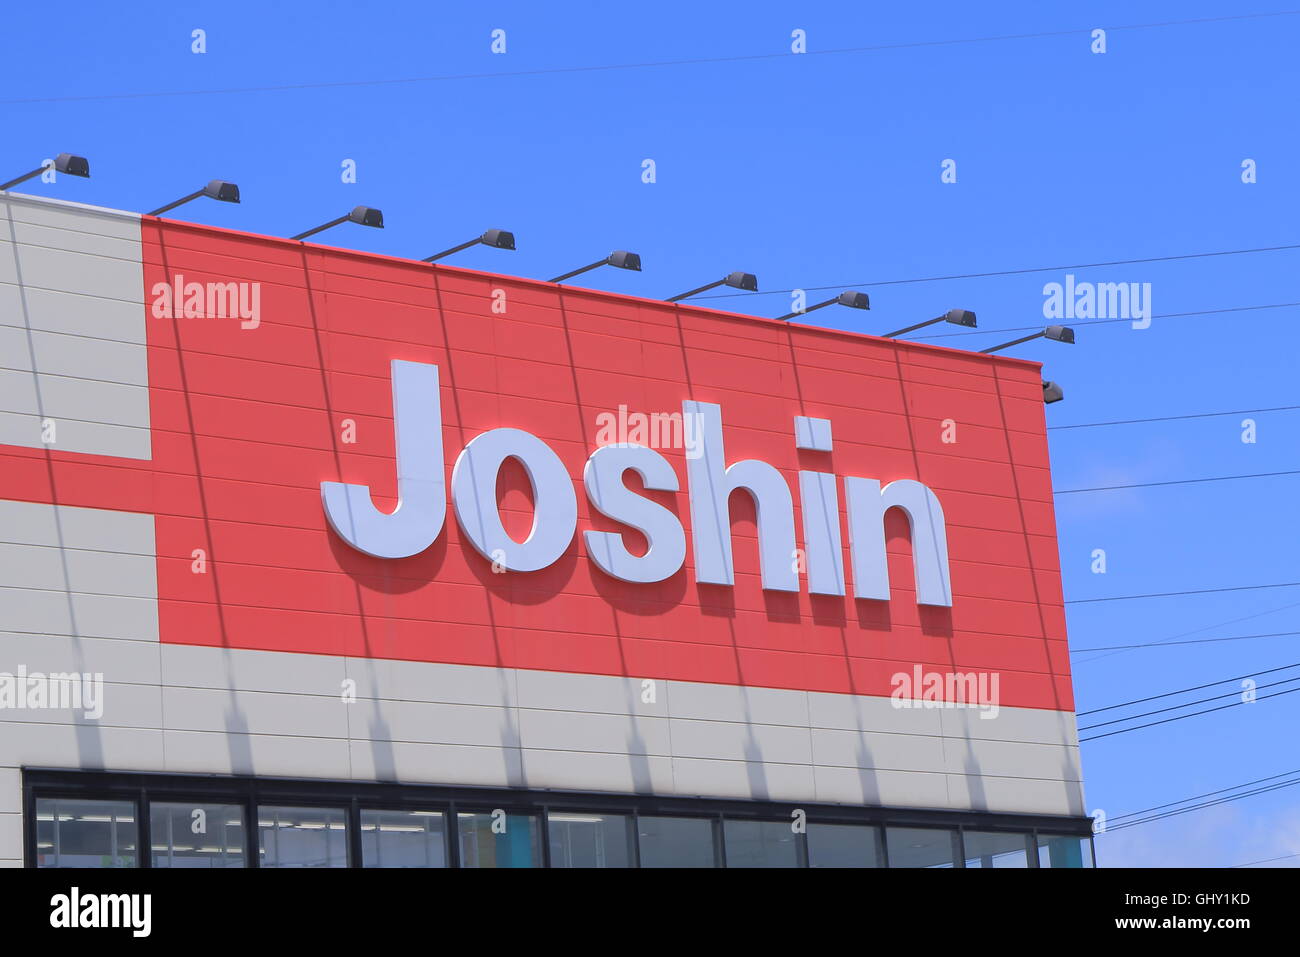 Joshin electronics store, an electronics store chain headquartered in Osaka founded in 1950. Stock Photo